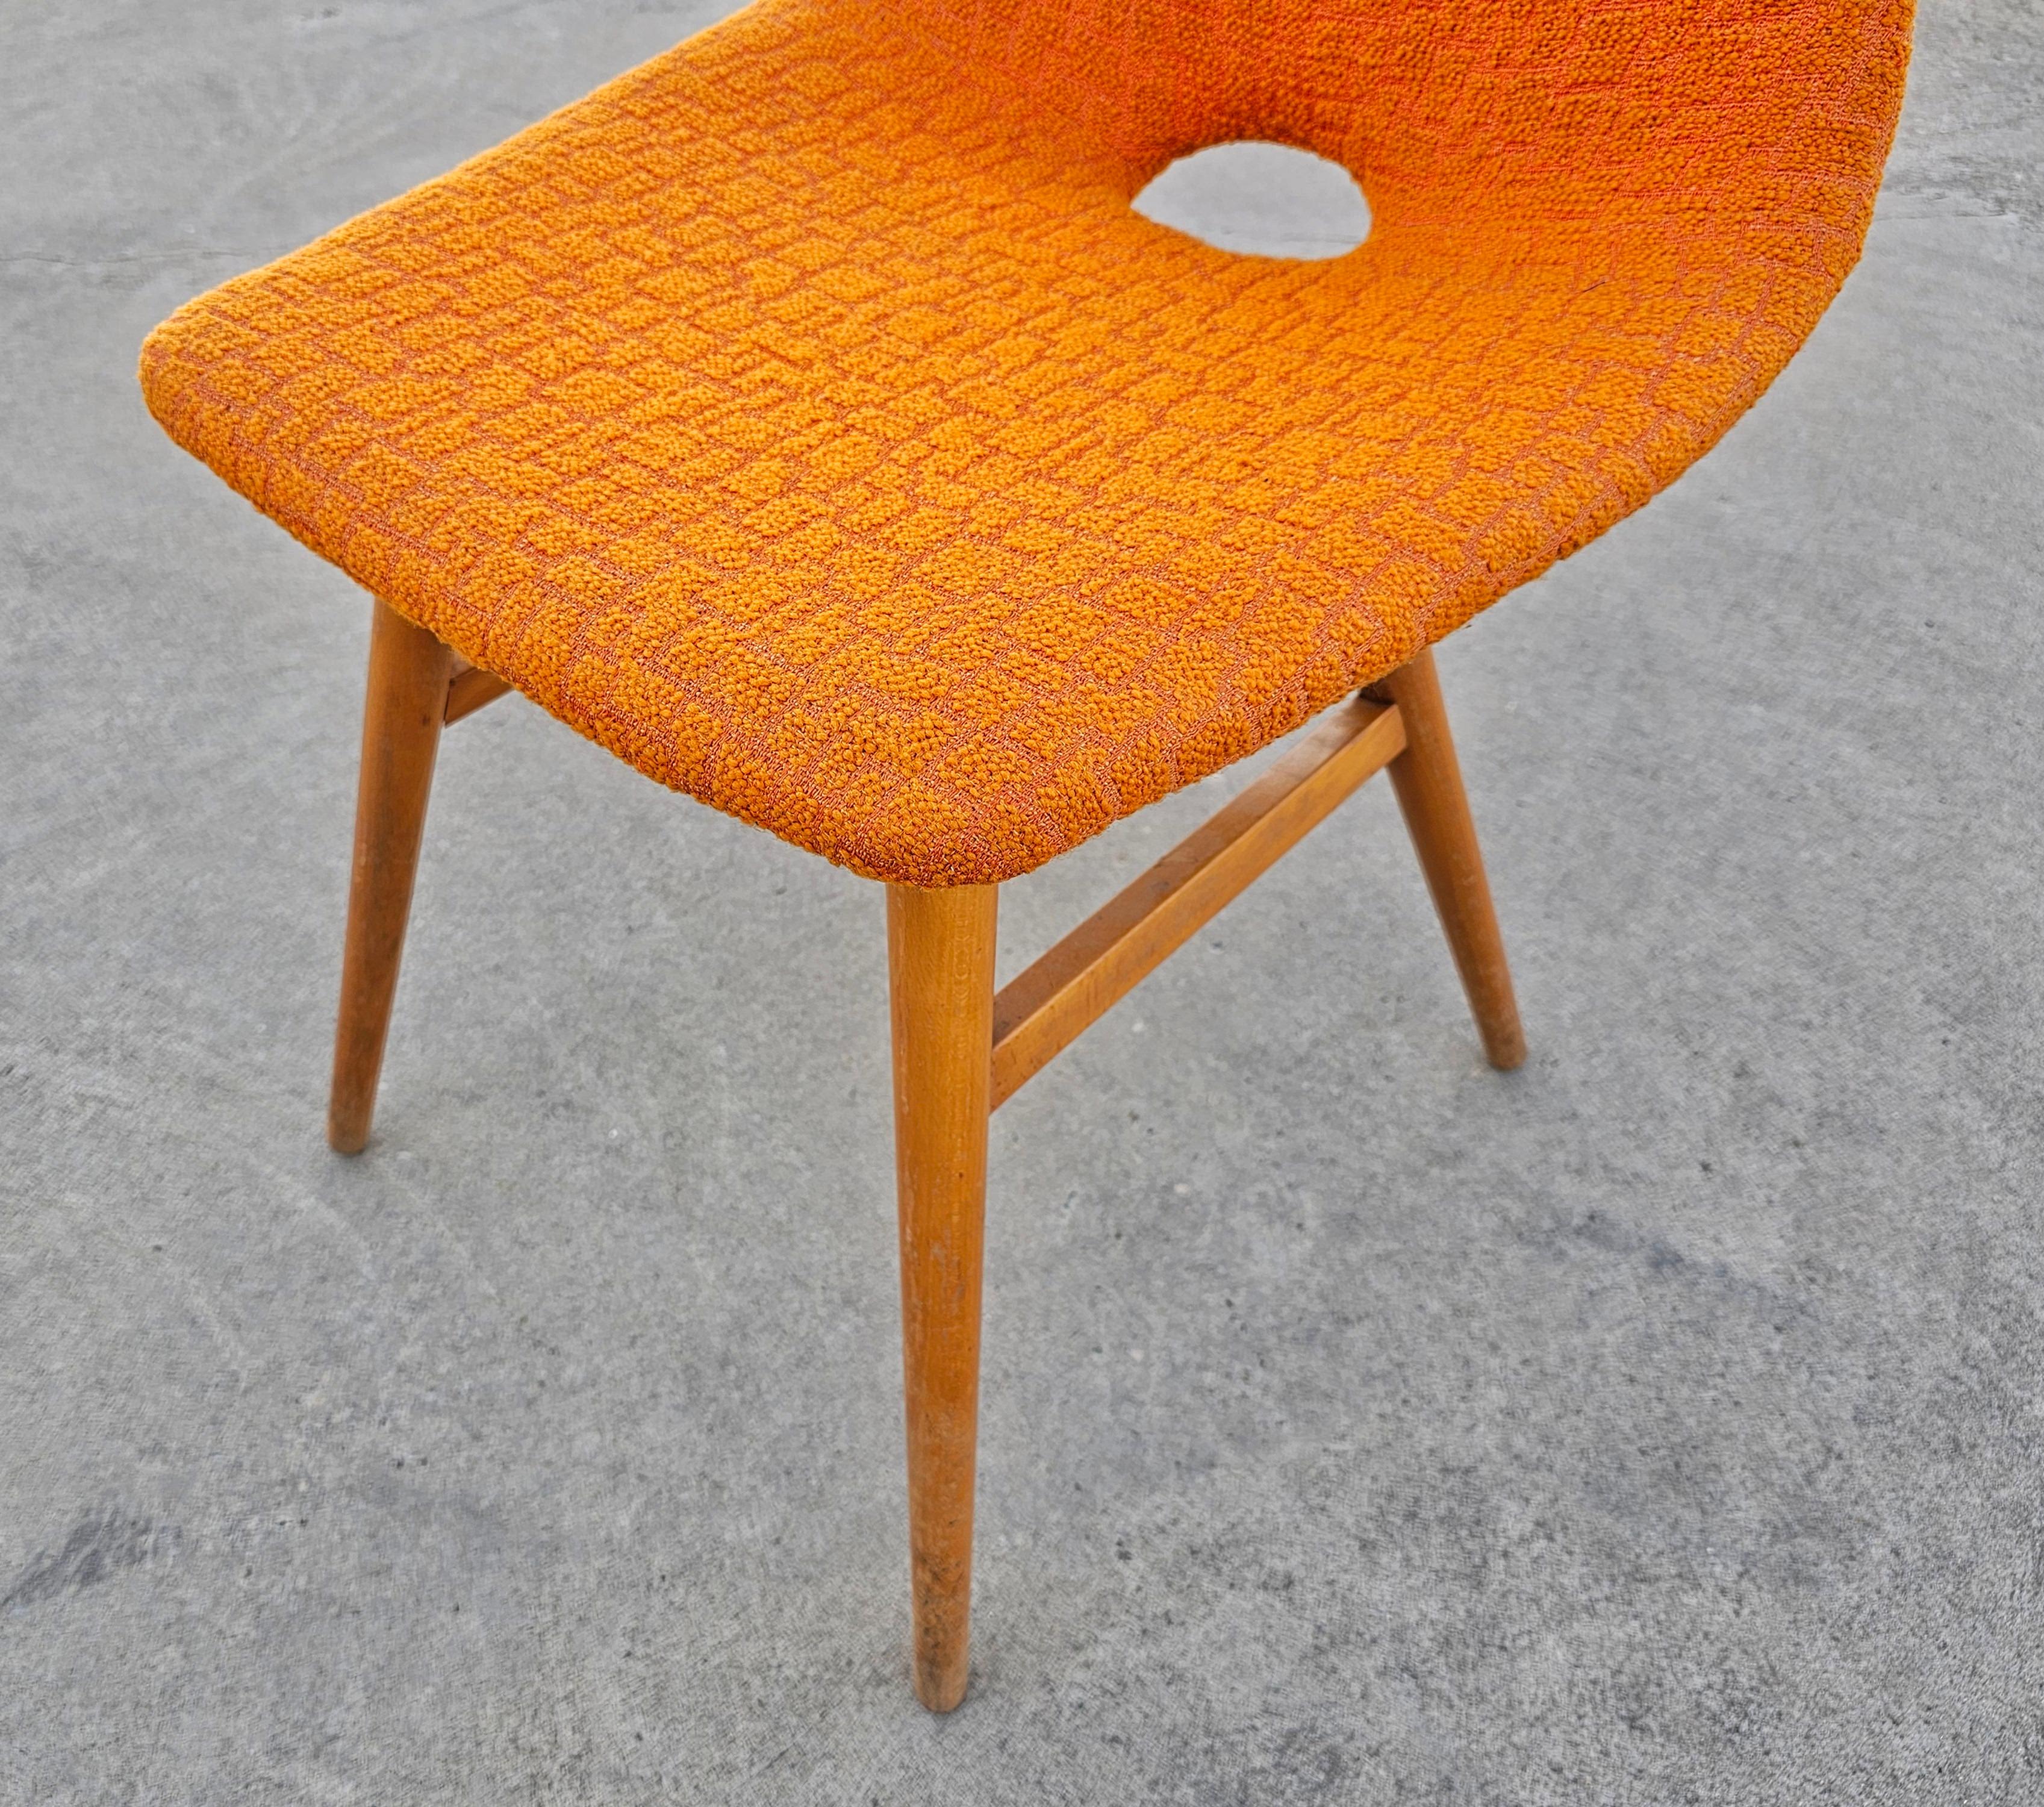 Pair of Mid-Century Modern Side Chairs by Judit Burian and Erika Szek, 1950s For Sale 1